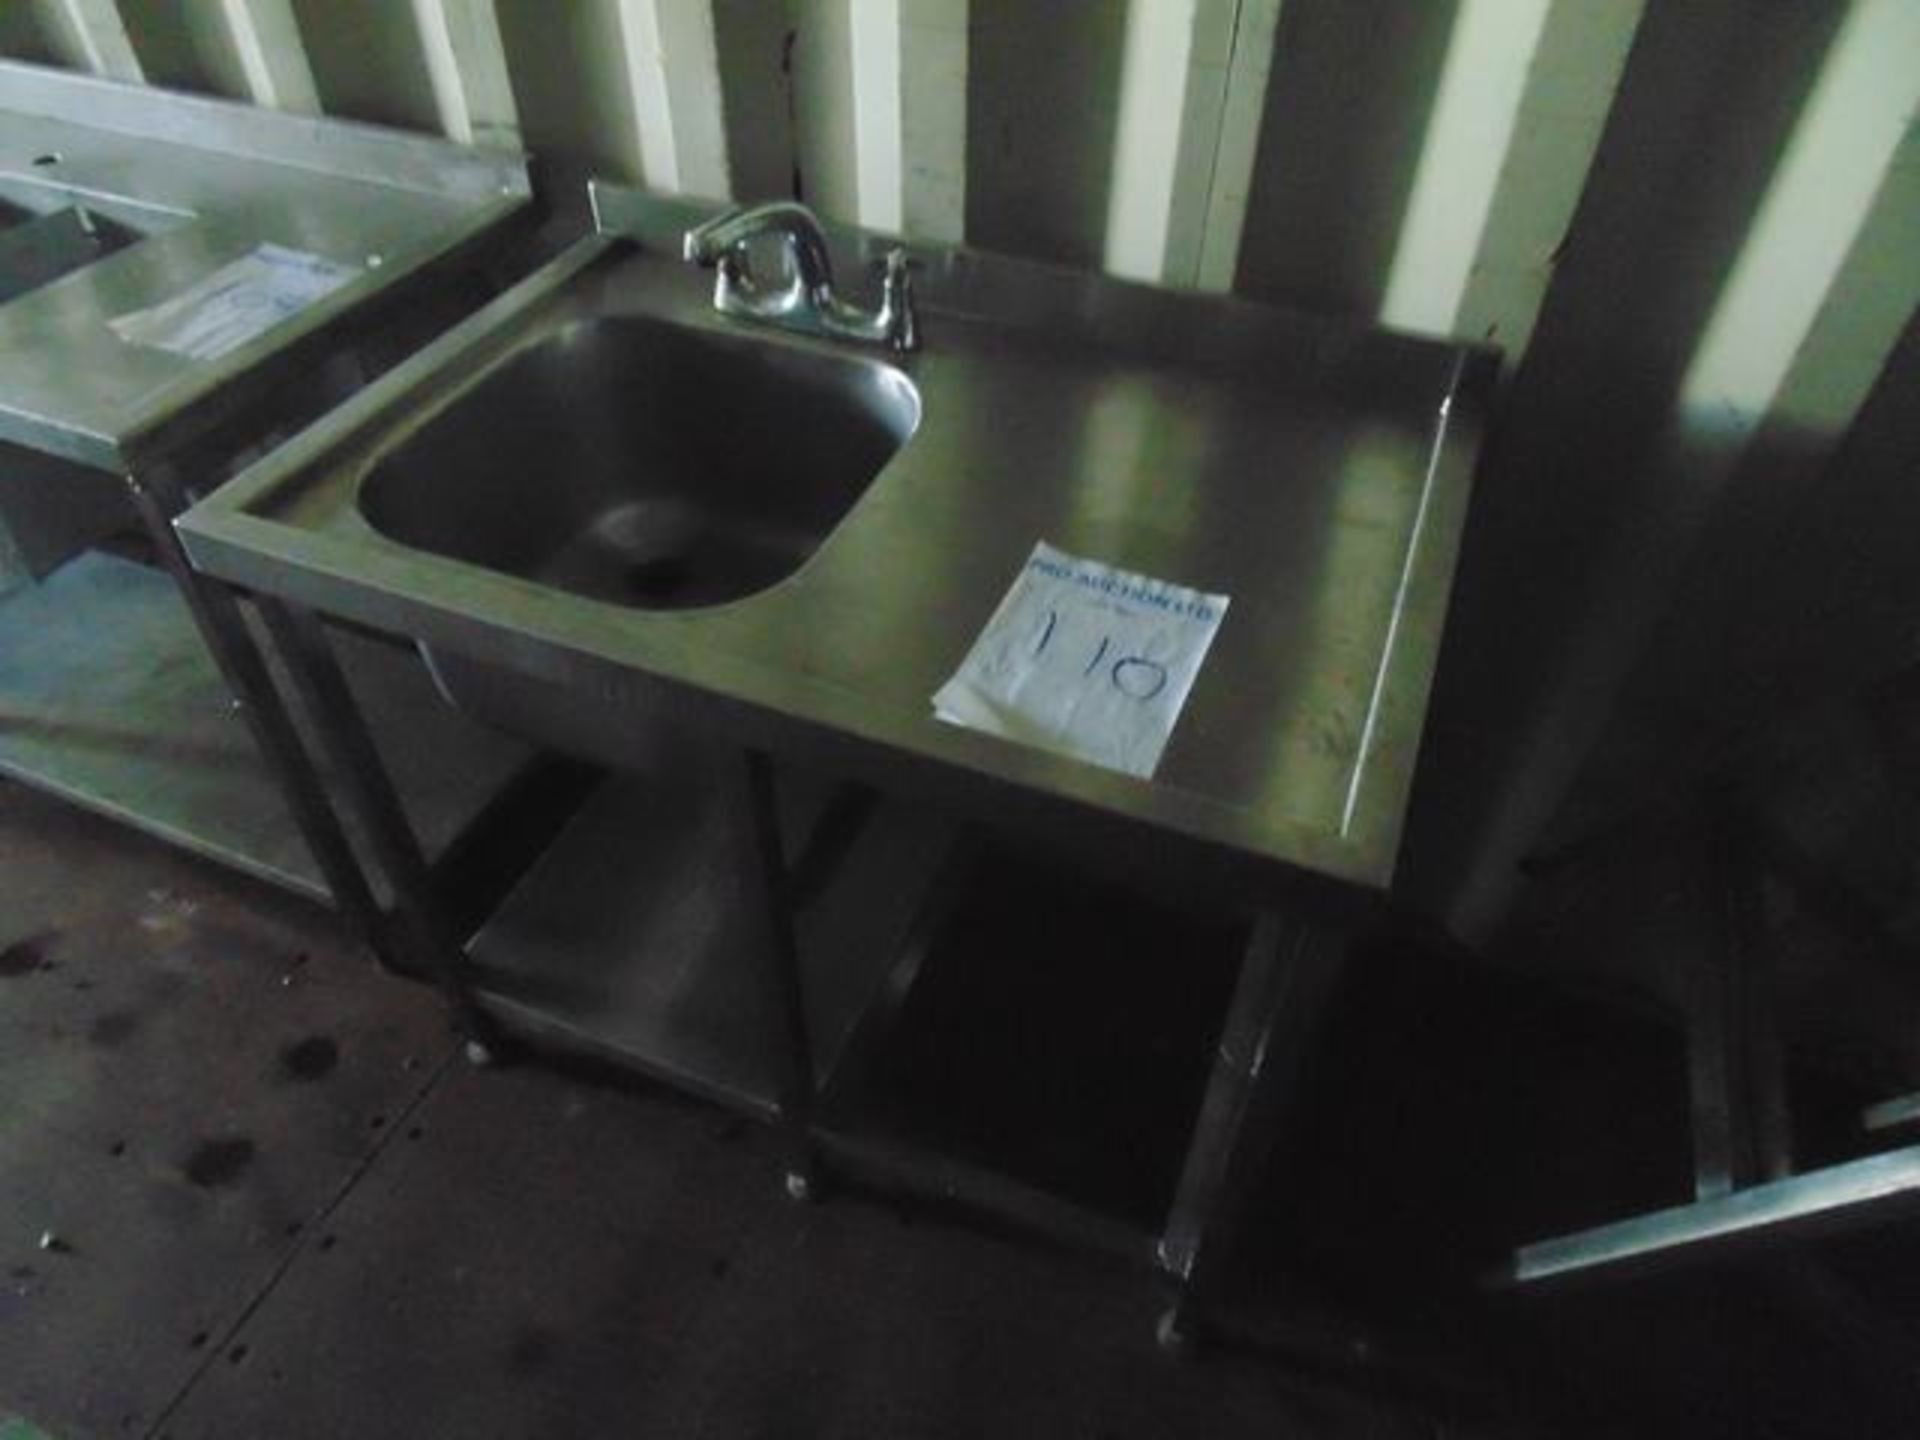 Stainless steel commercial sink RHD 930mm x 600mm